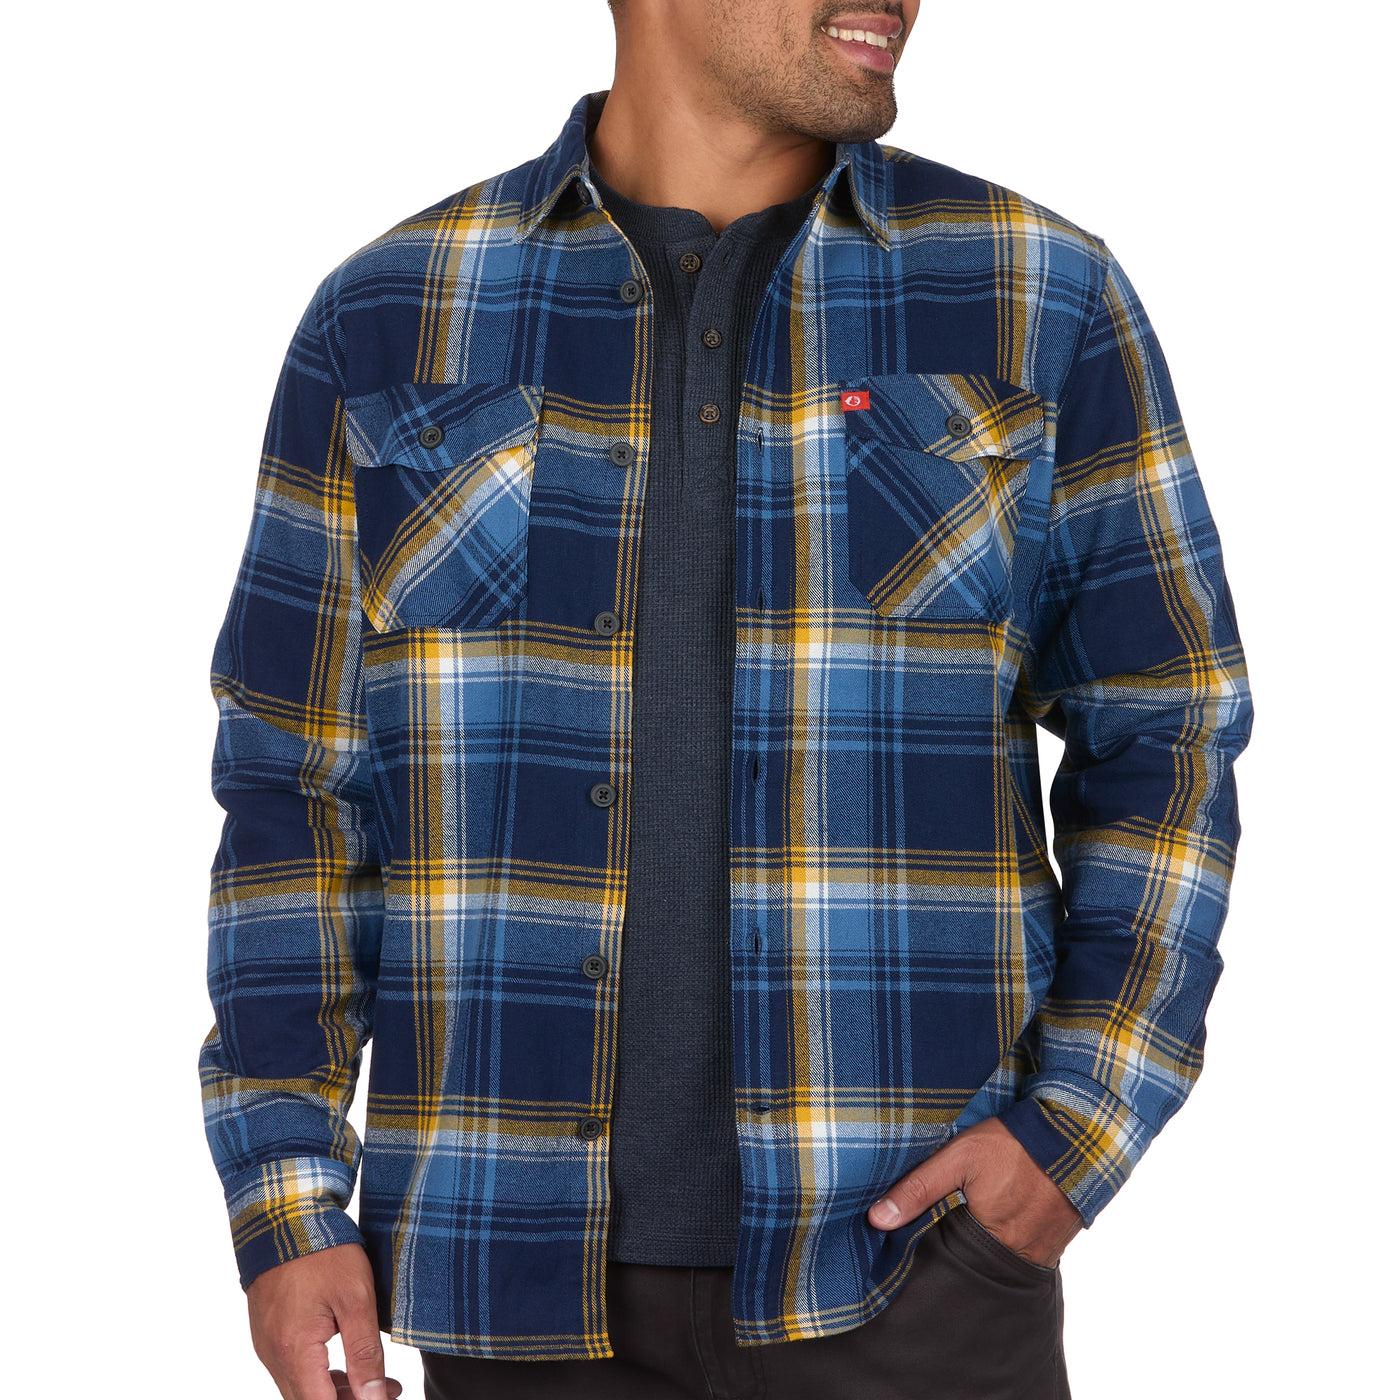 Heavyweight Flannel Shirt with Patch and Flap Pockets - The American Outdoorsman 